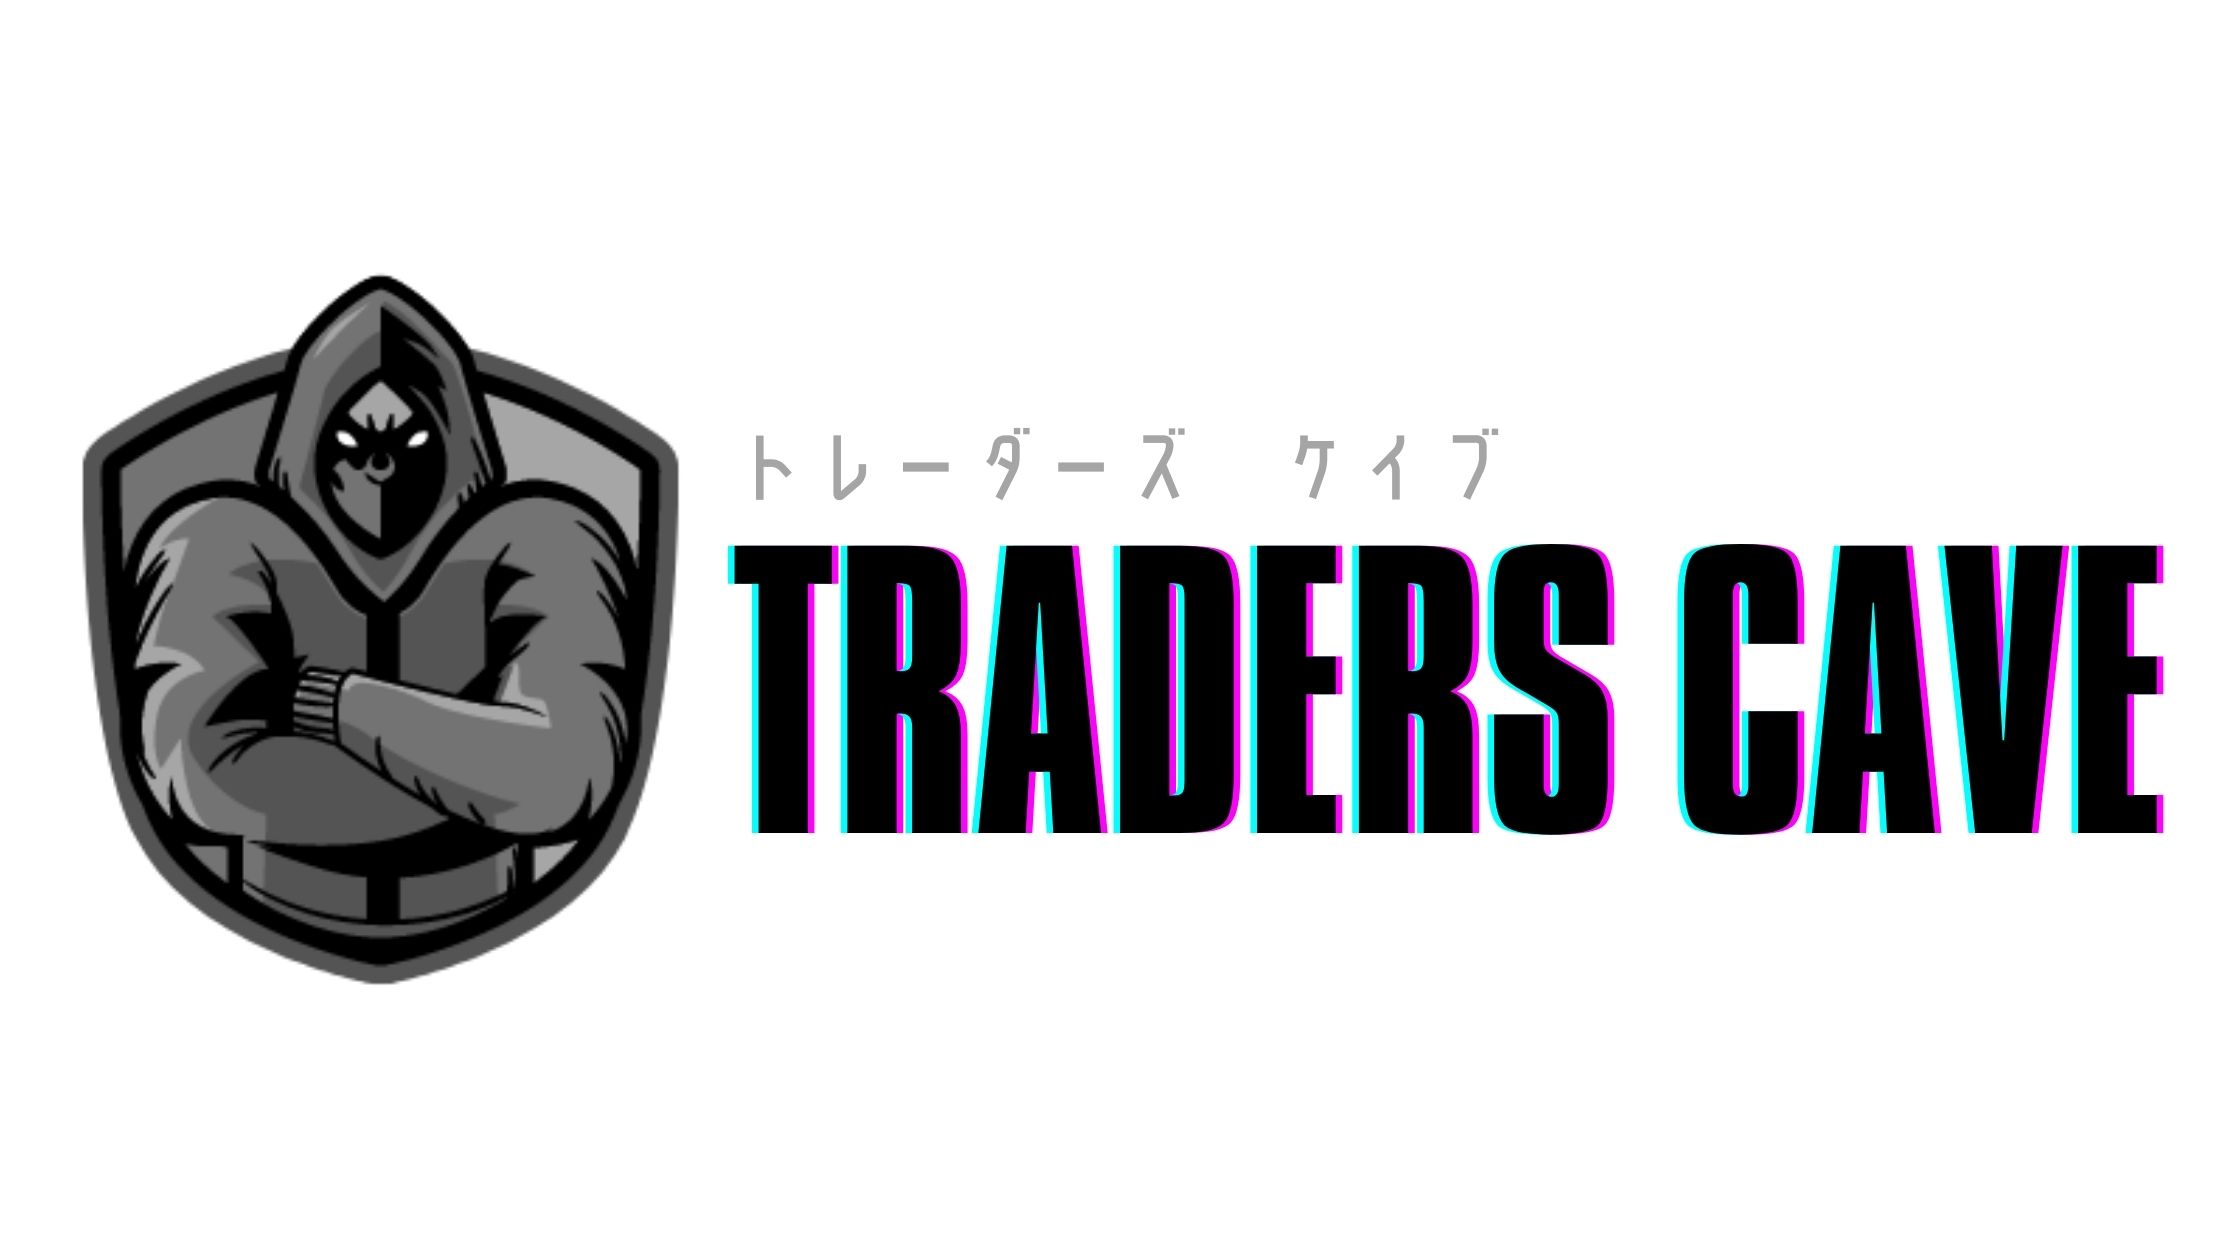 TRADERS CAVE